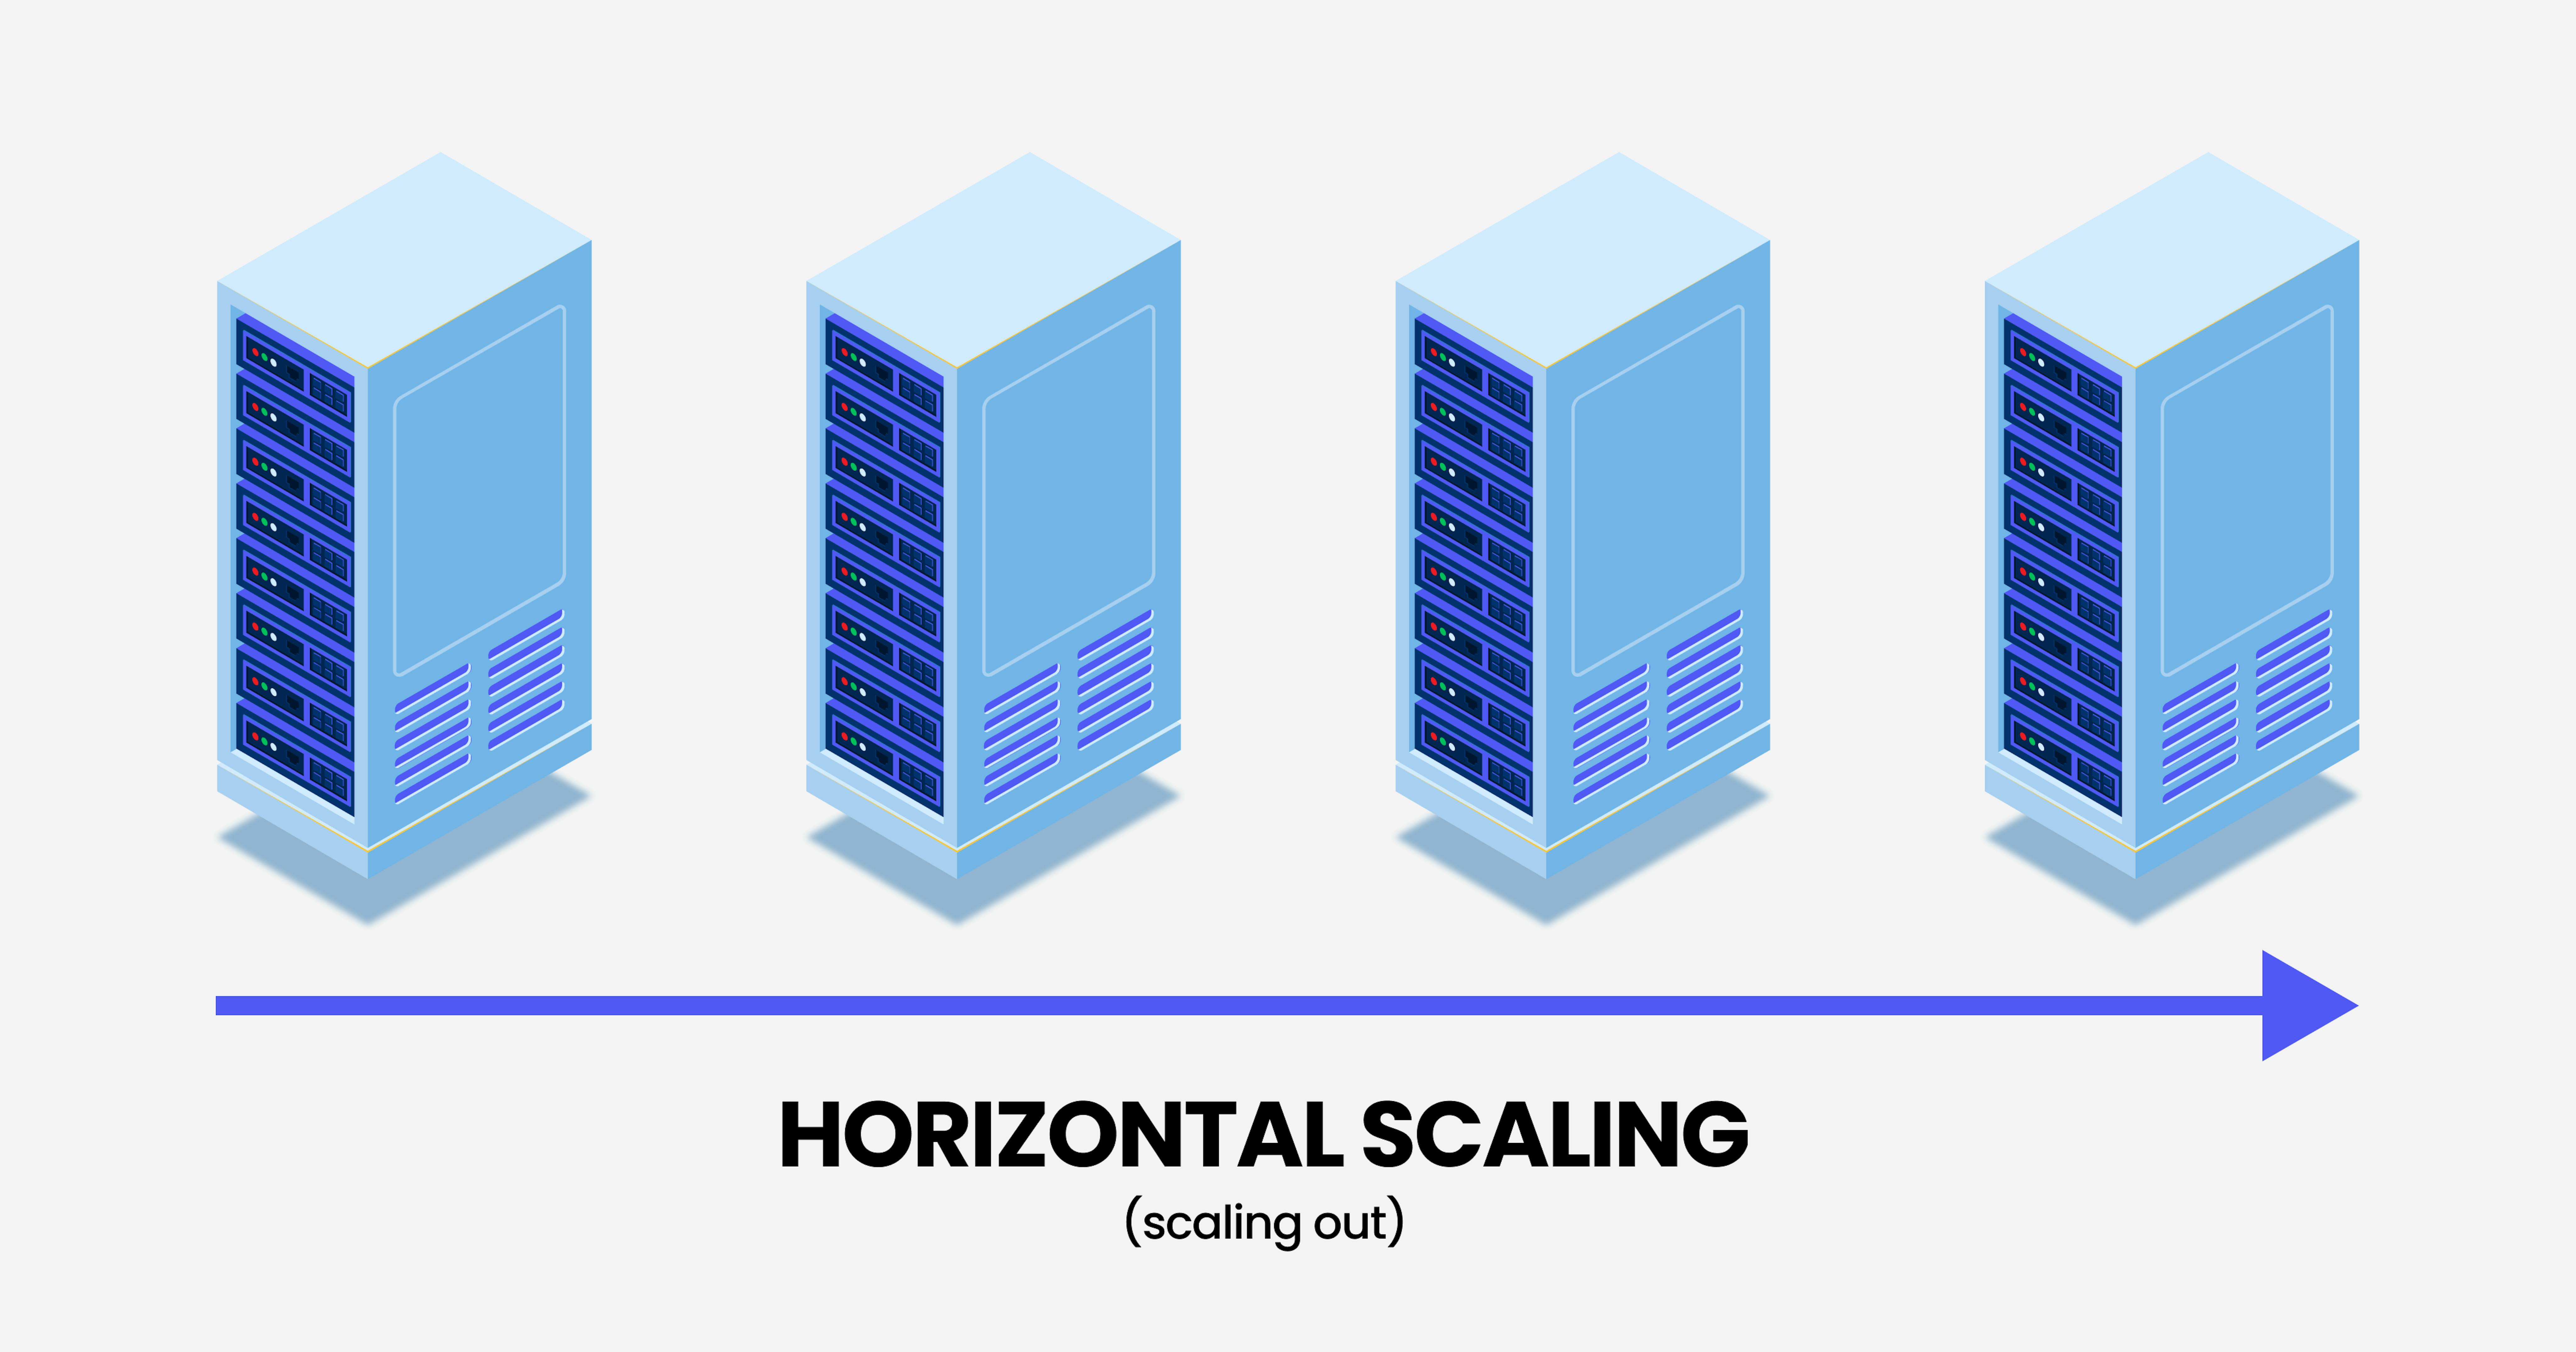 What is horizontal scaling?